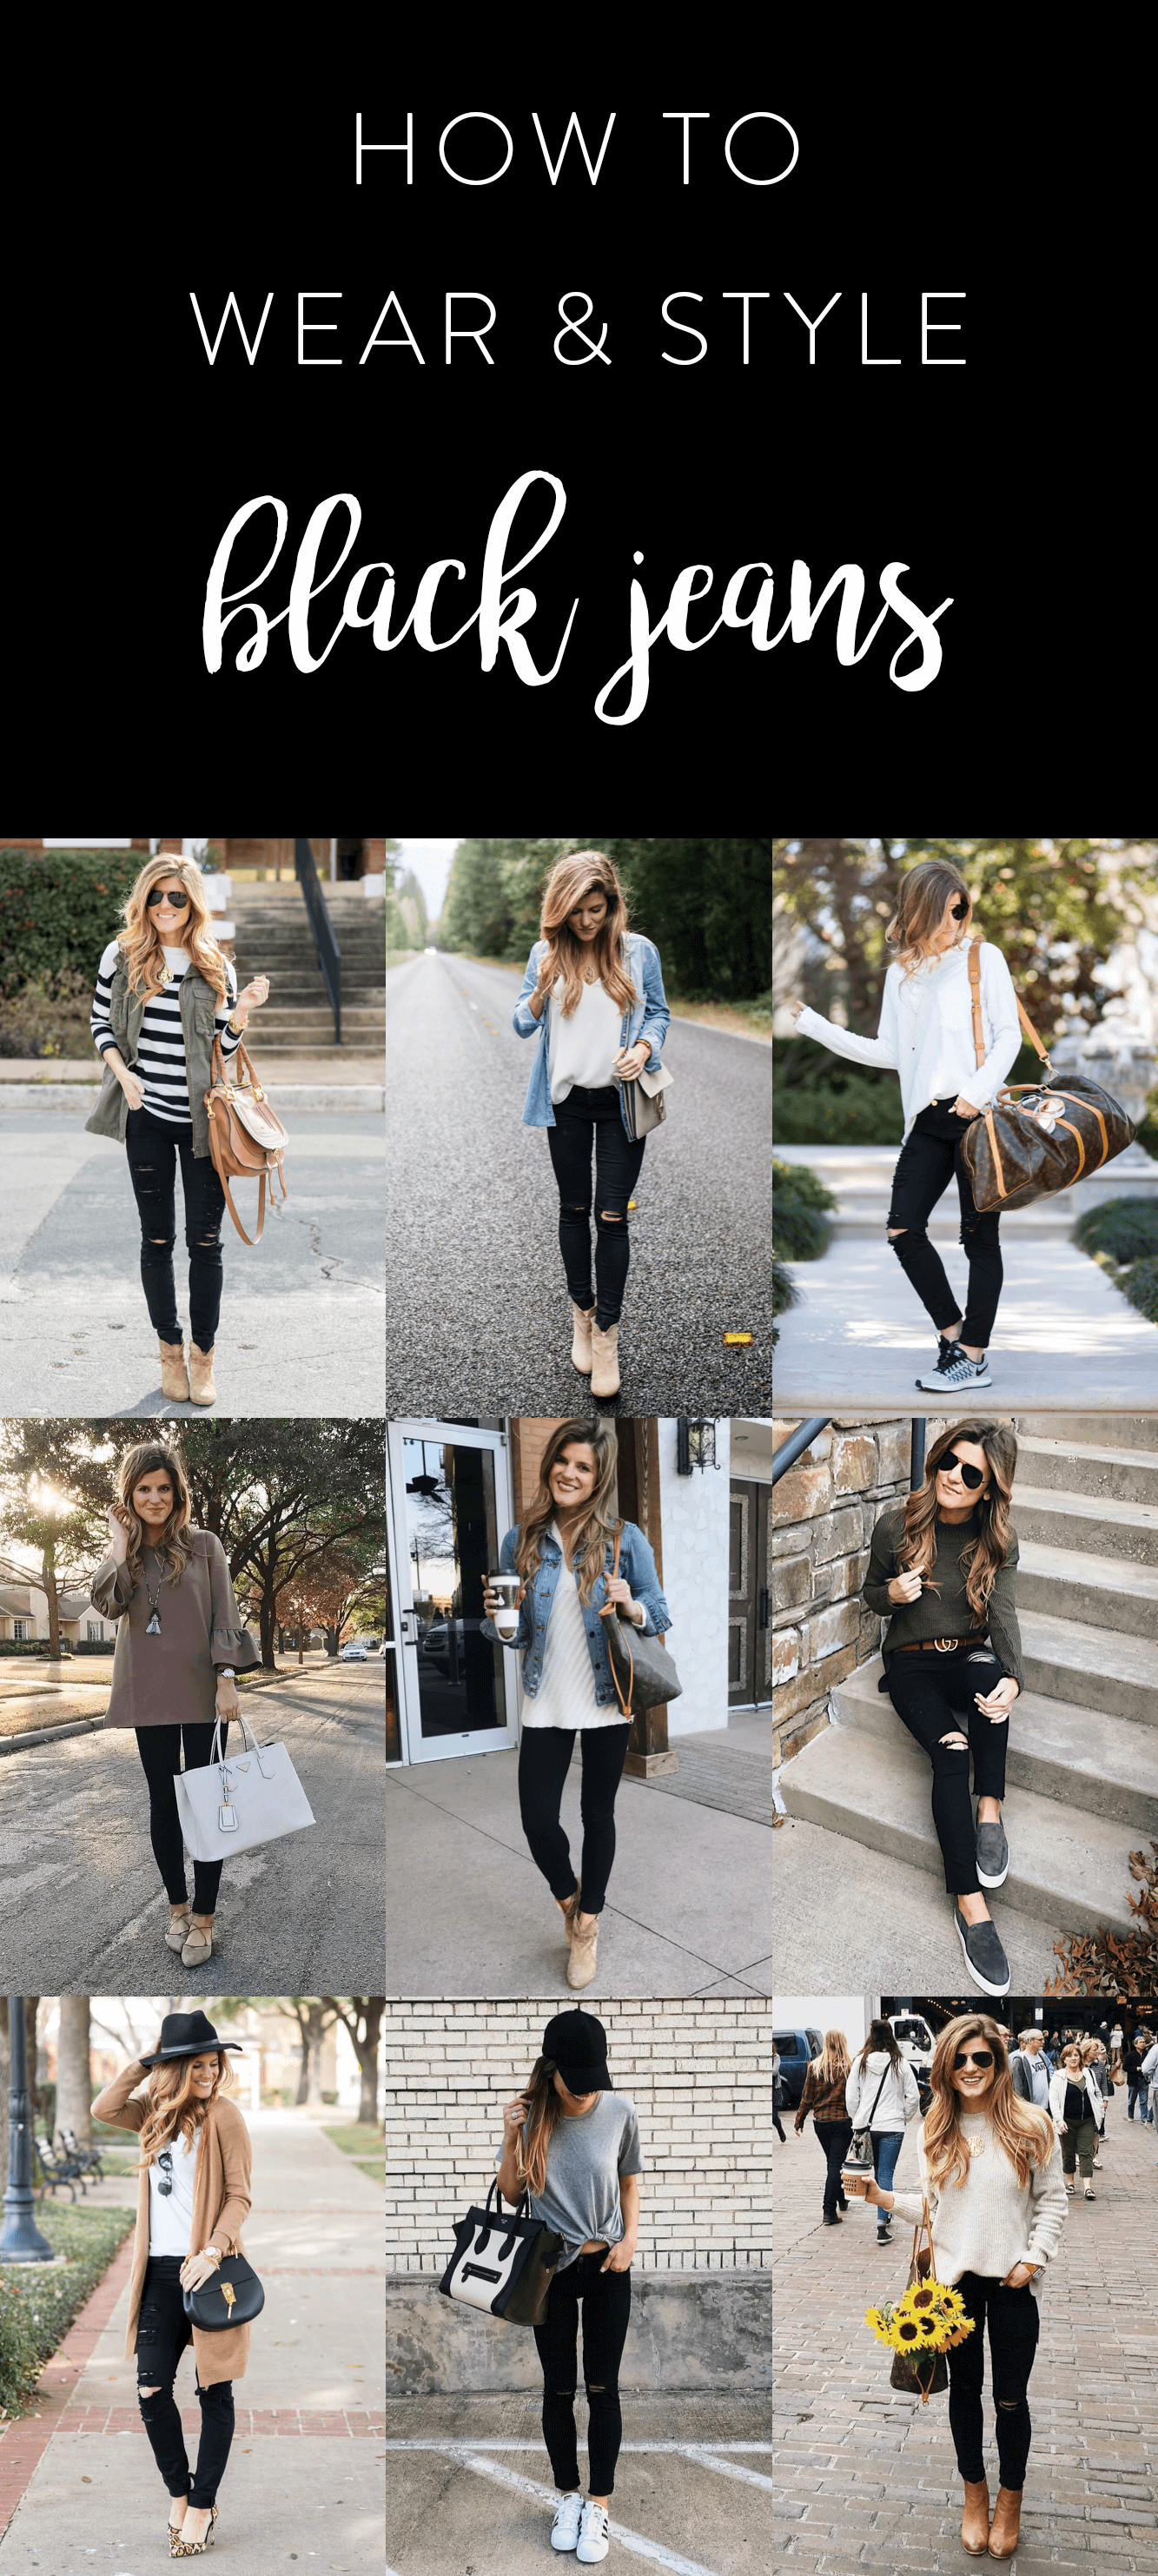 What to wear with black jeans - 30+ Black Jeans Outfit Ideas - What to wear with black jeans - 30+ Black Jeans Outfit Ideas -   13 style Black jeans ideas